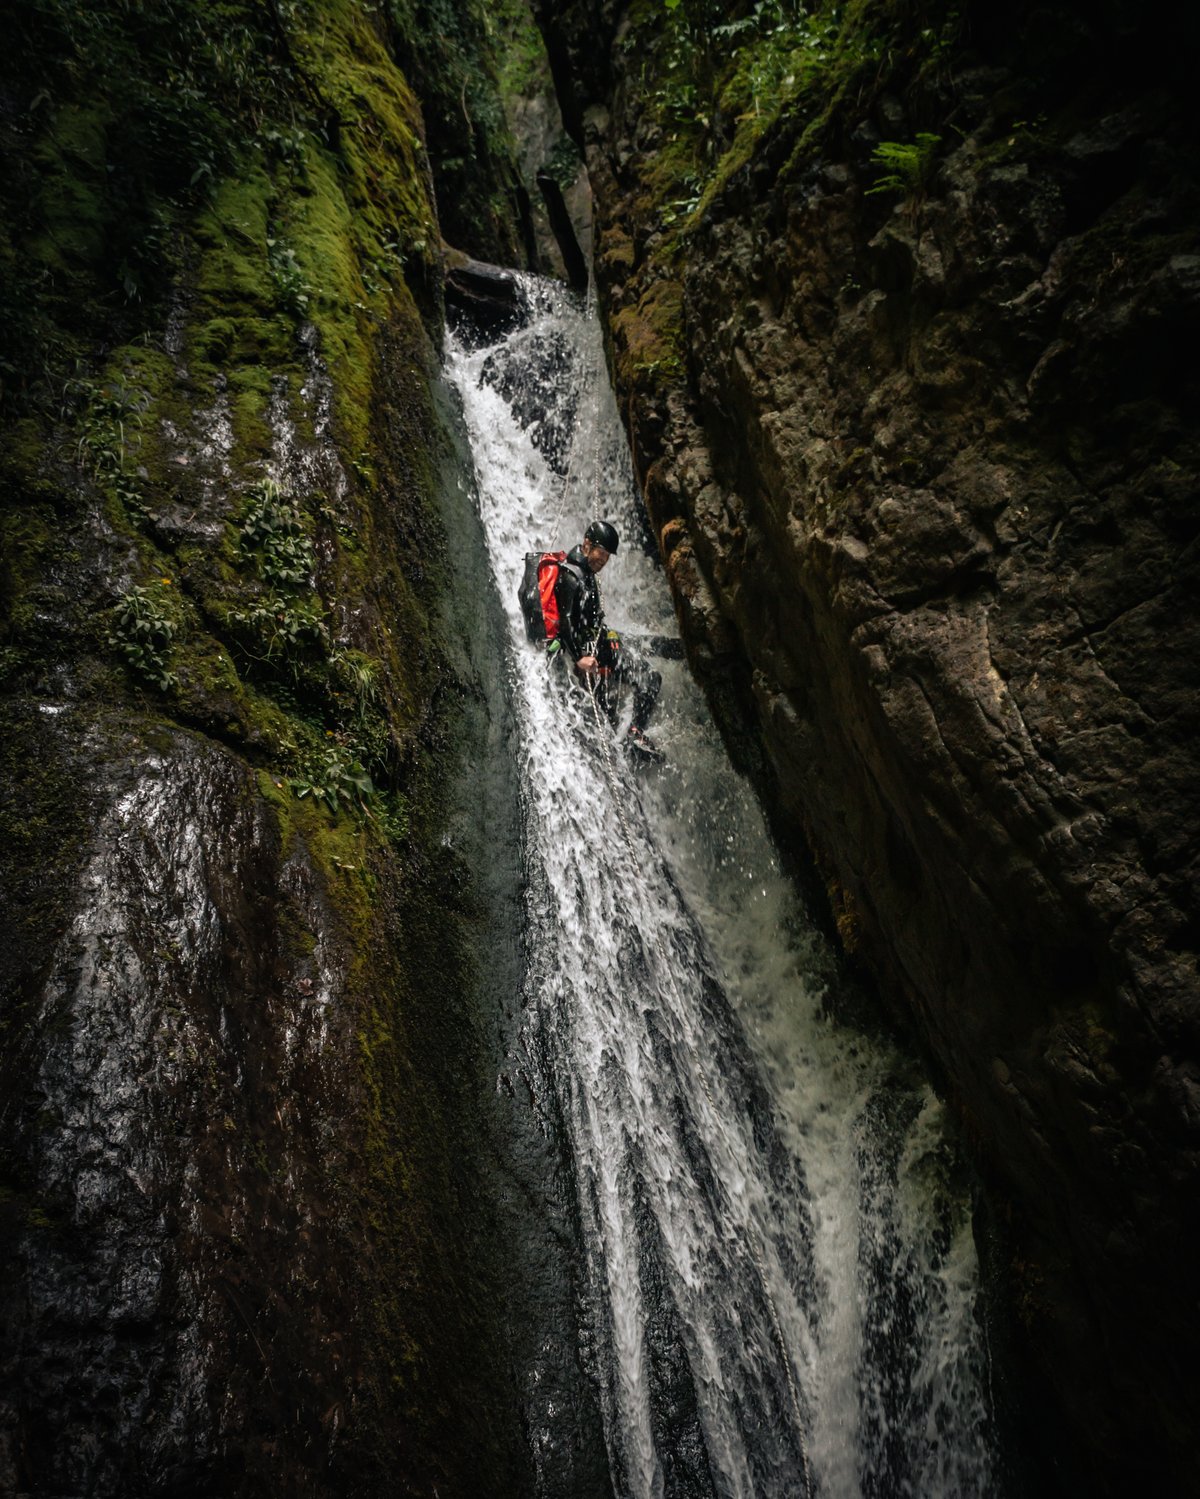 canyoning-guide-abseils-down-epic-corkscrew-waterfall-decent-in-alva-glen